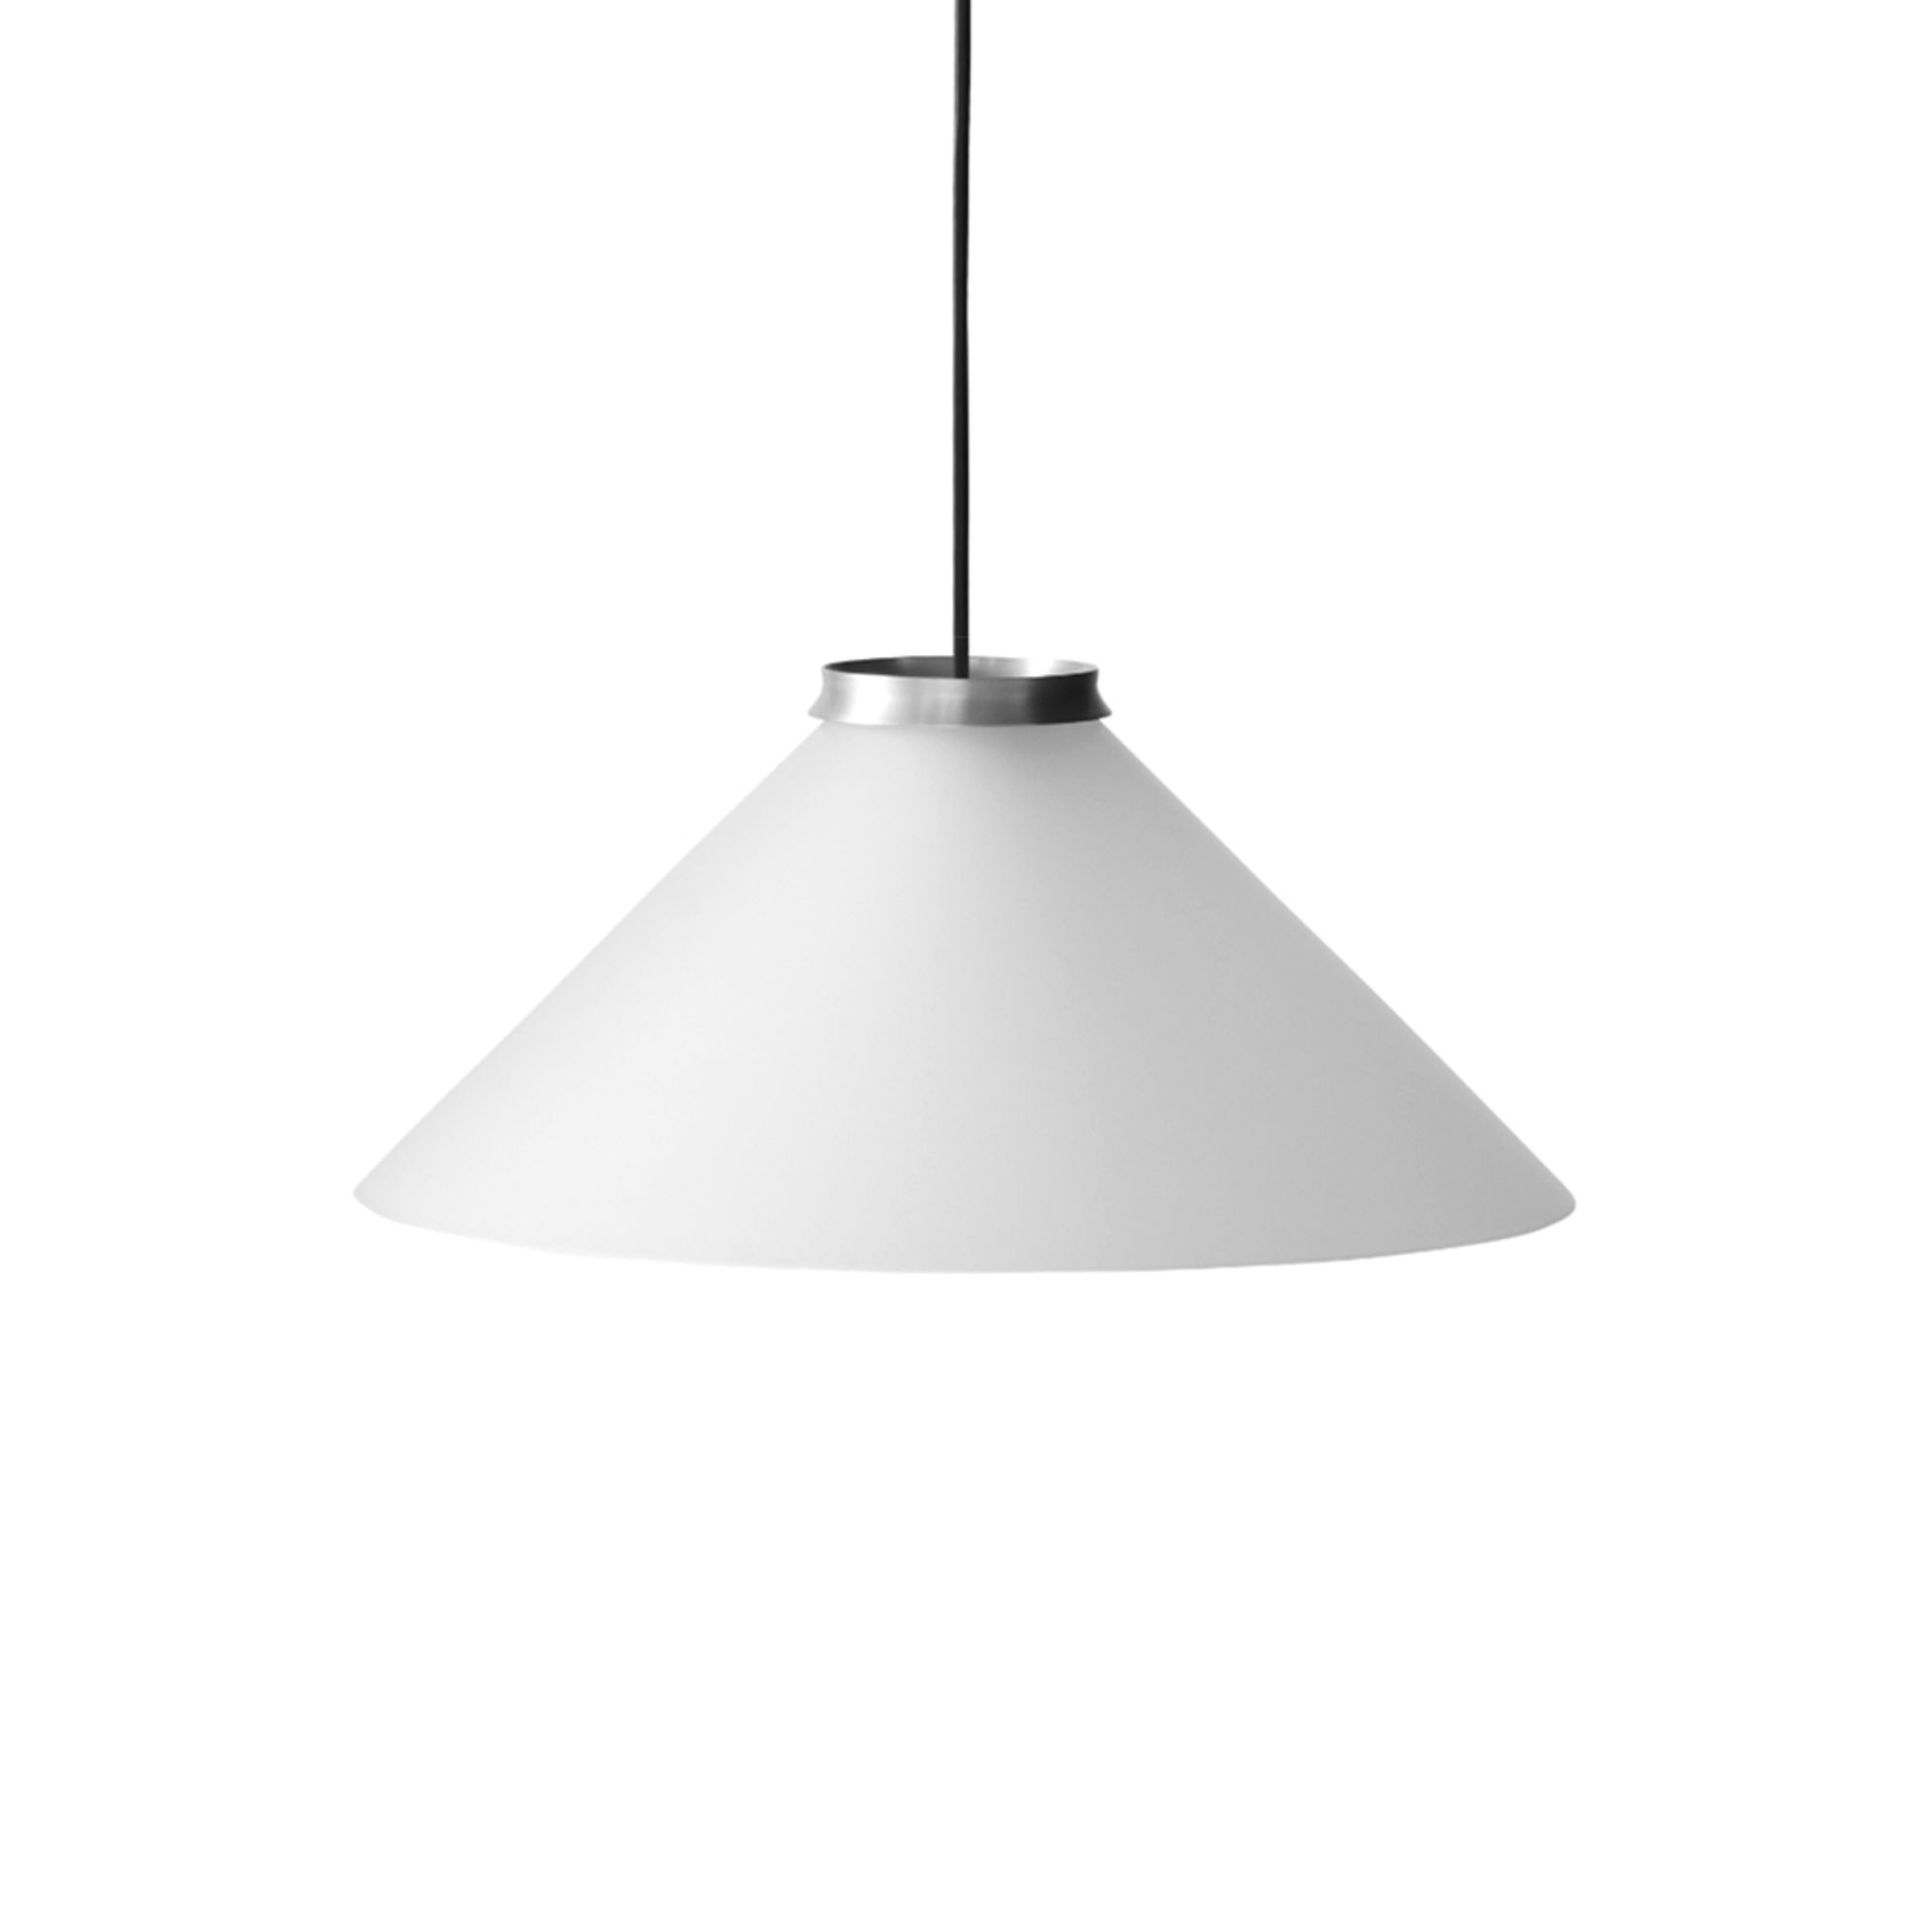 The Aline 40 Pendant by Pholc 0